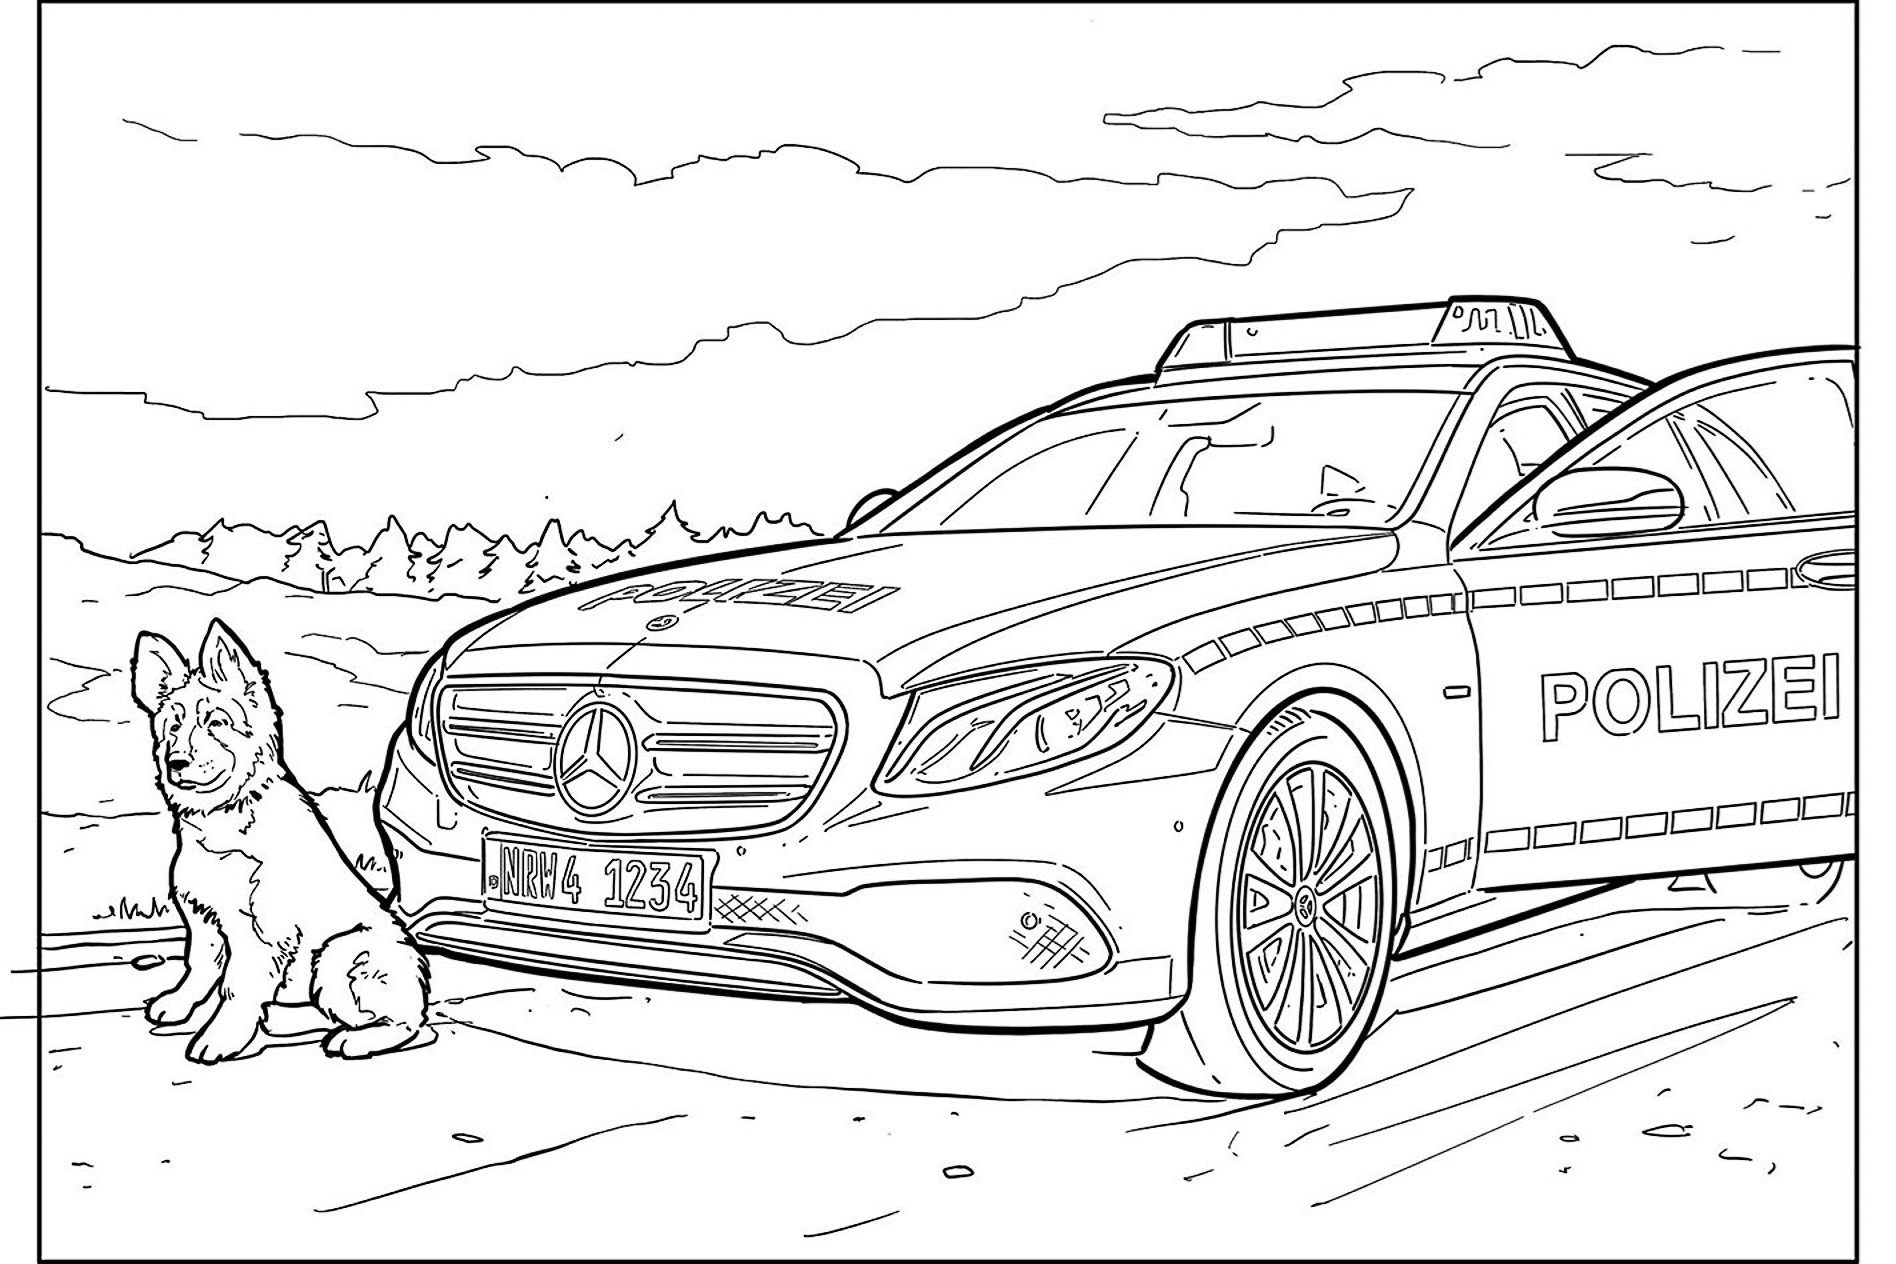 The best boredom-busting car-themed colouring books